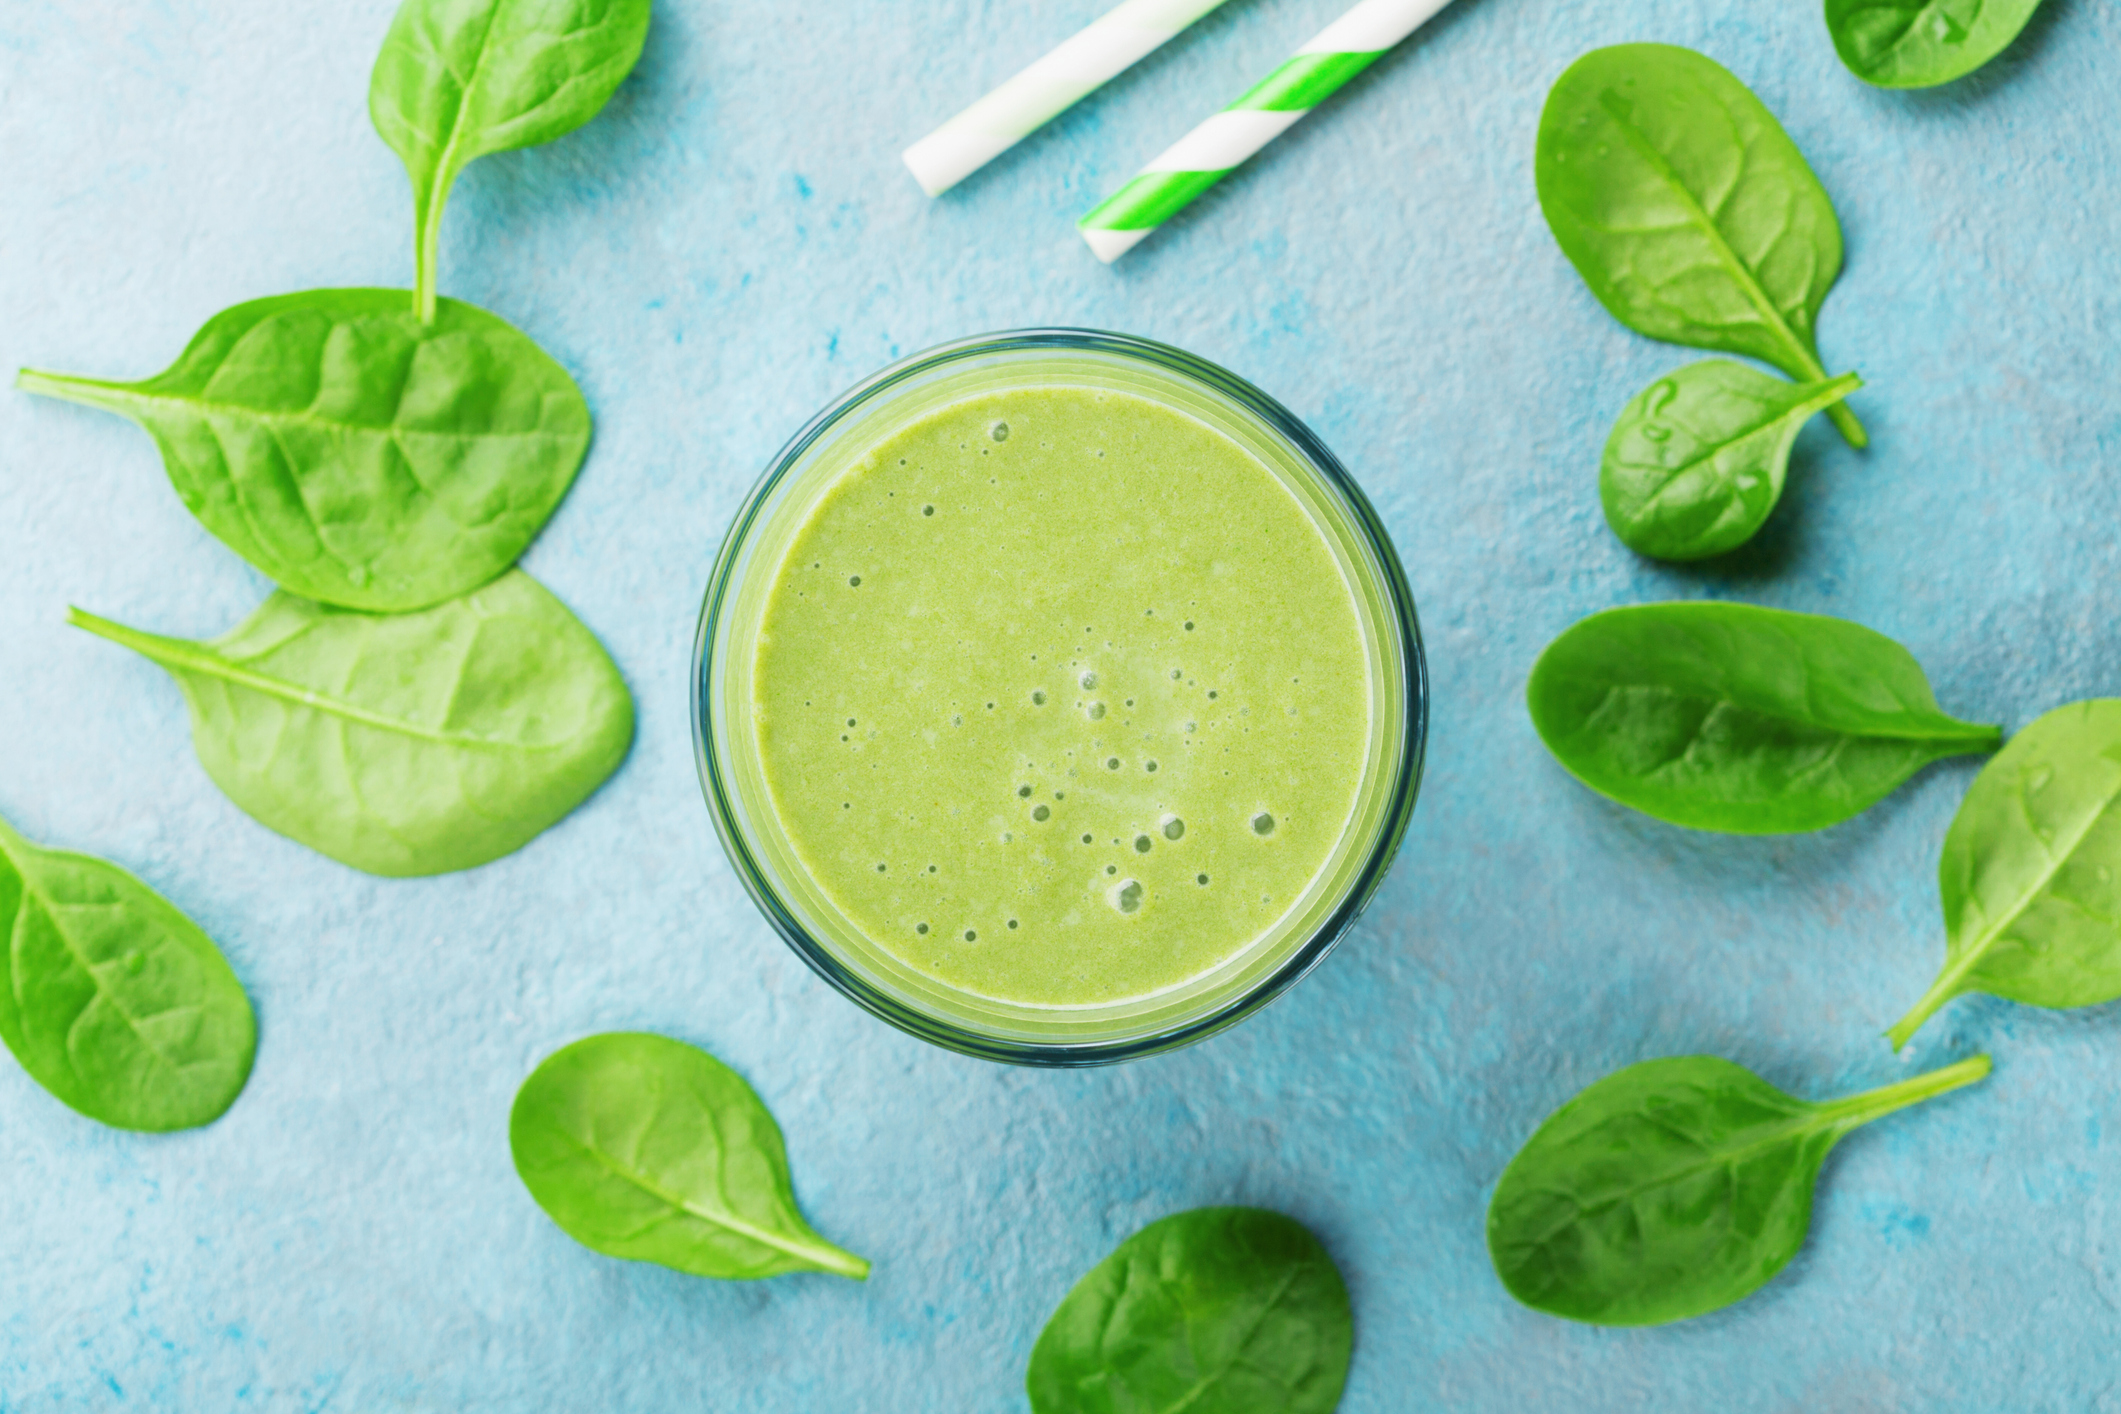 How spinach can help prevent colon cancer